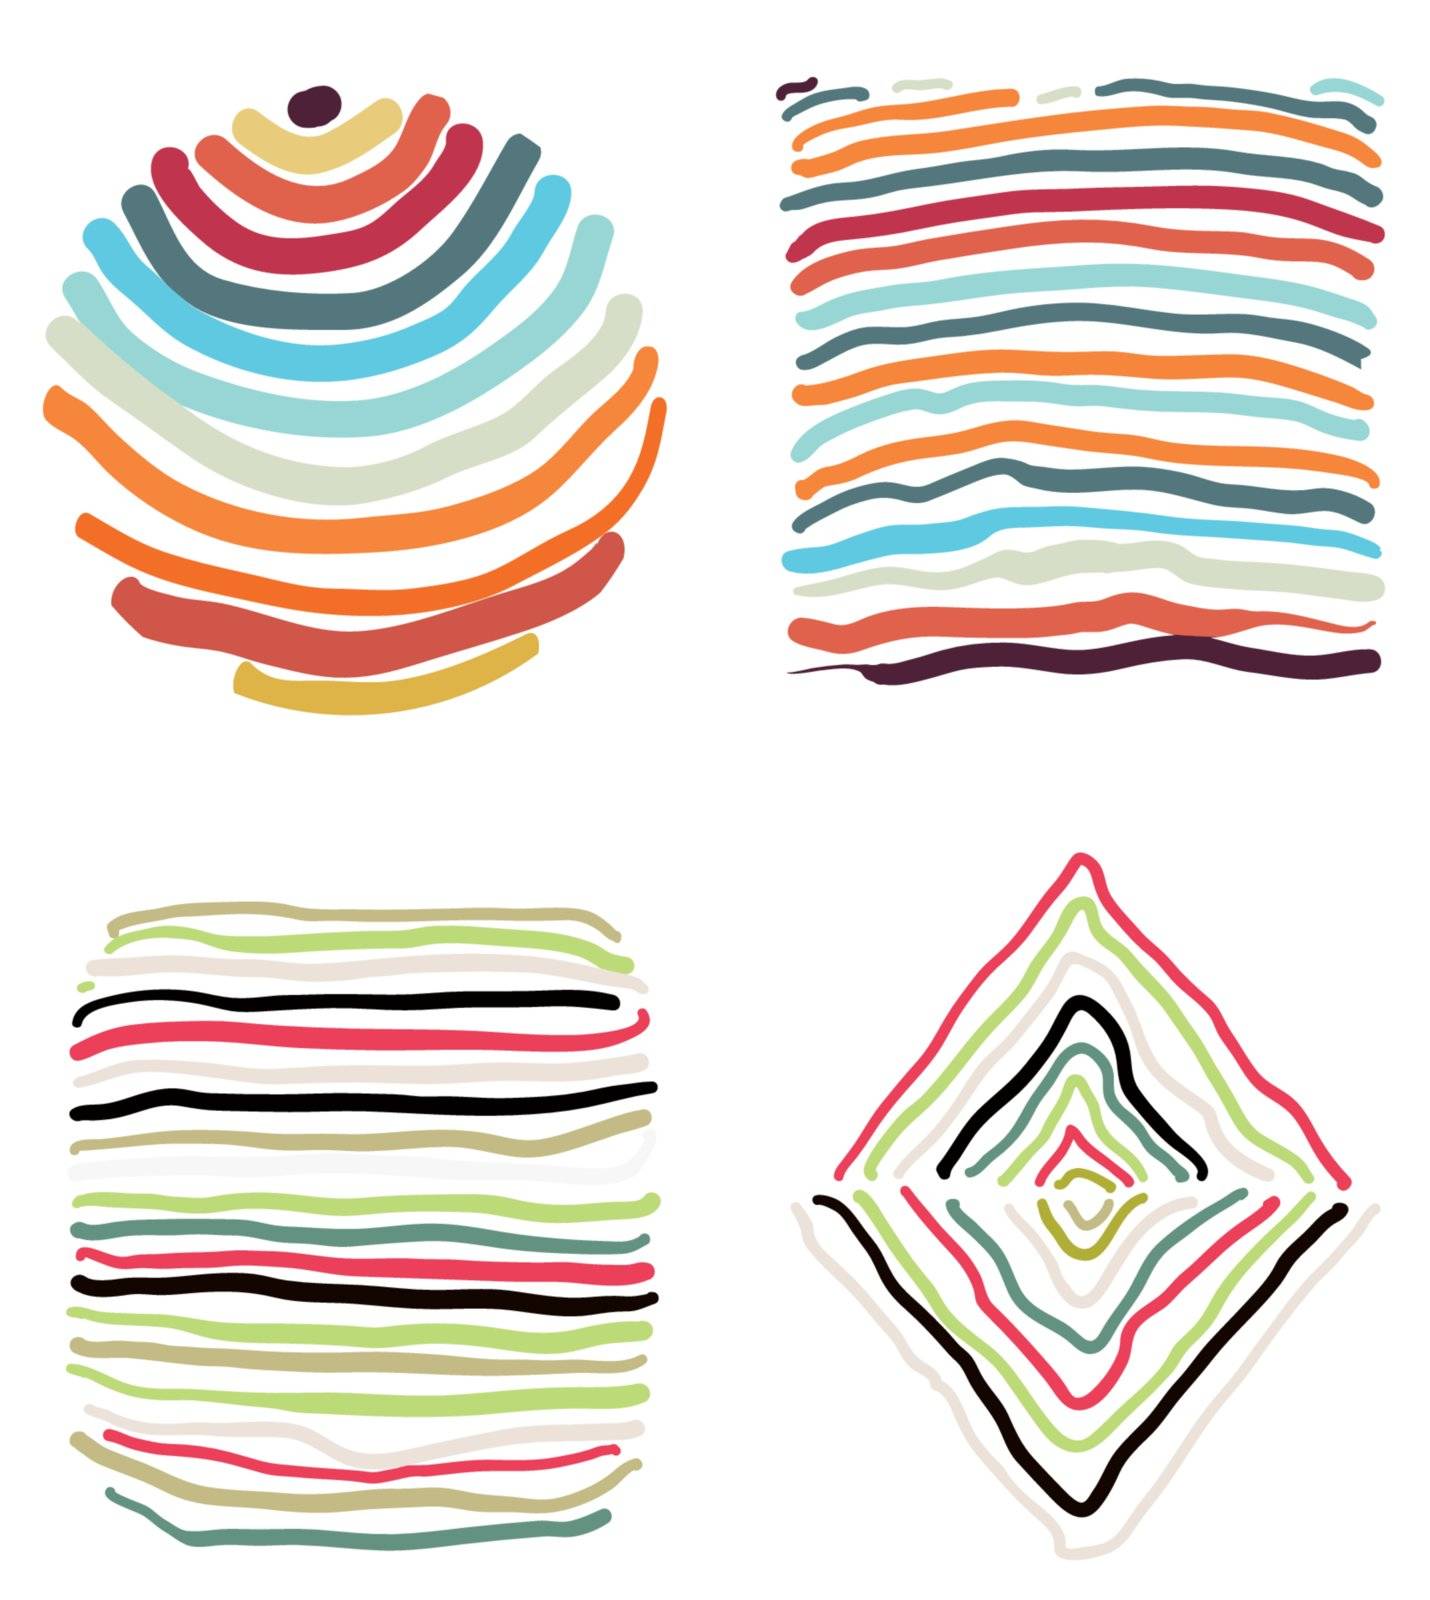 Abstract diamond, circle, square and rounded square made brushstrokes of different colors. Vector. EPS8.